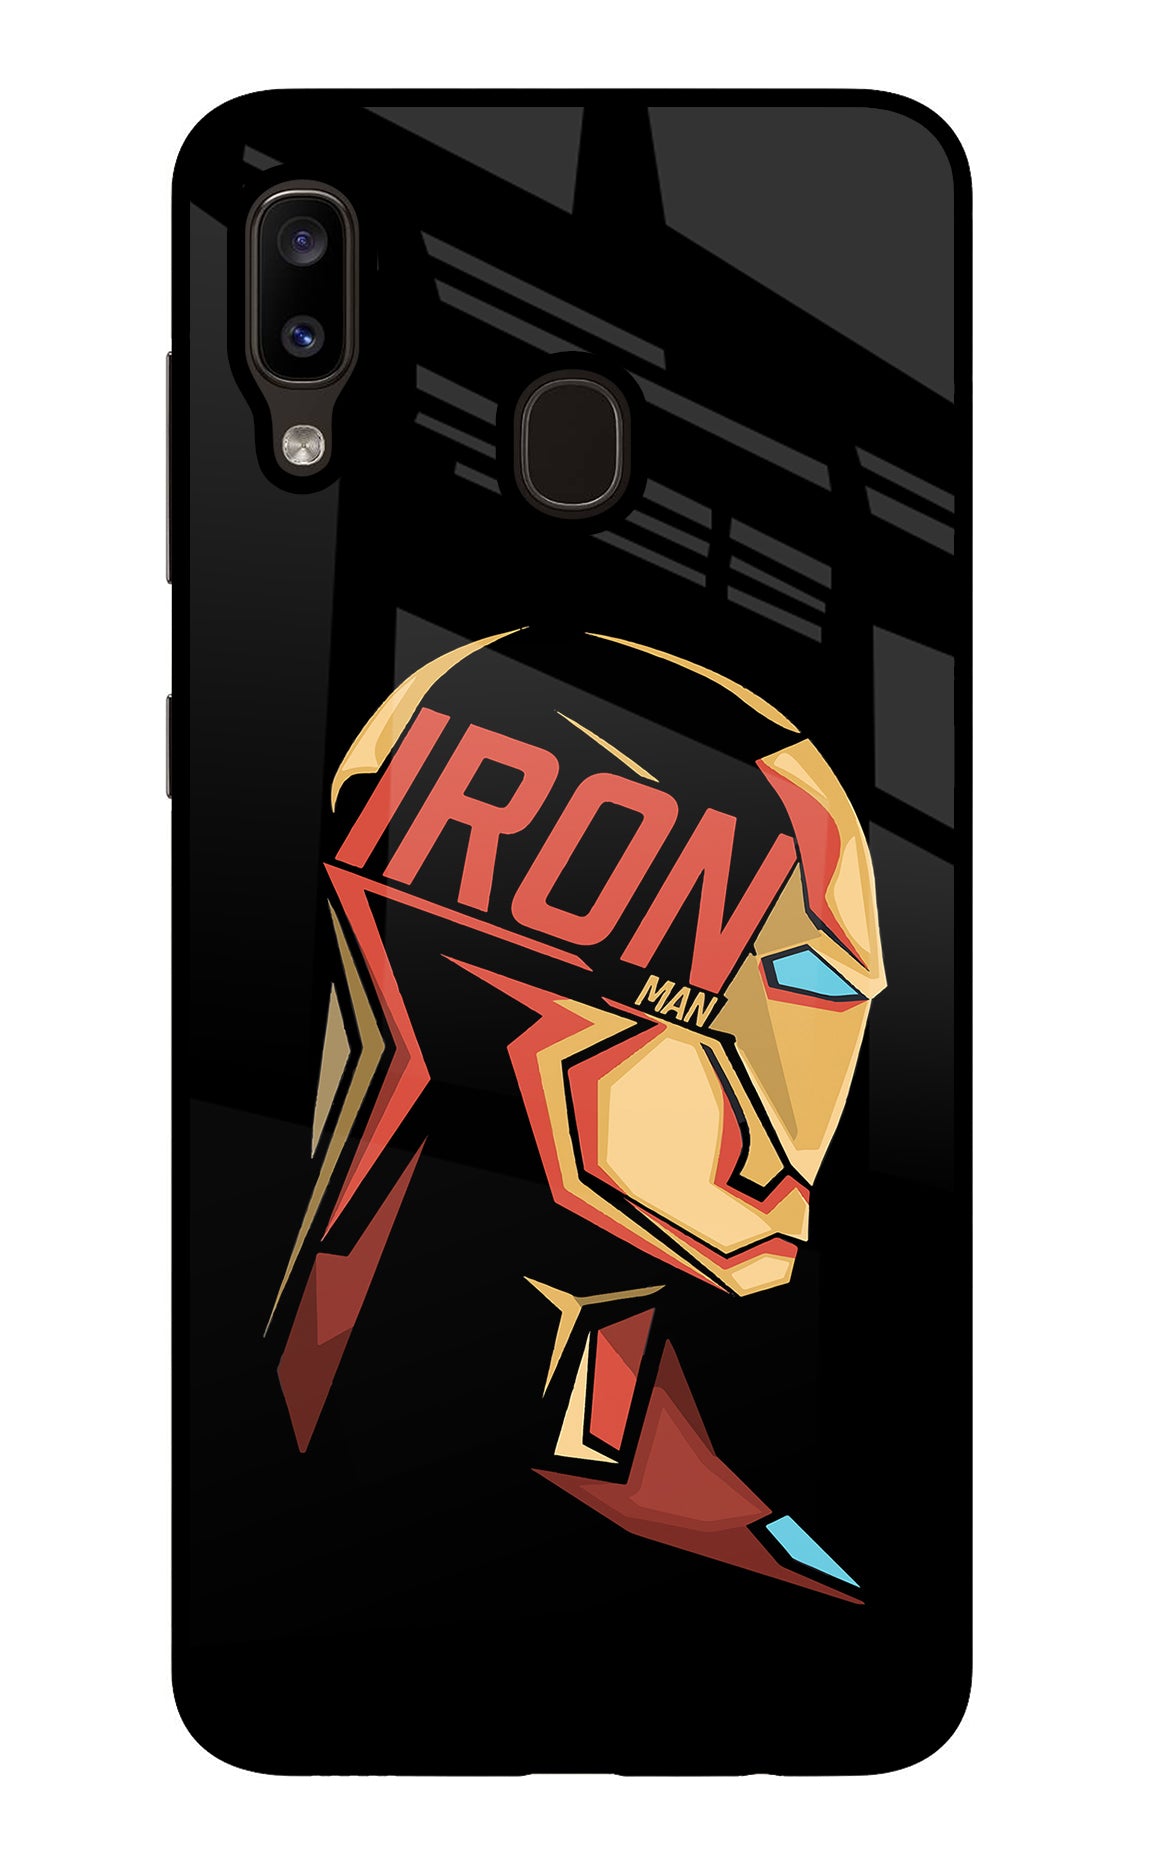 IronMan Samsung A20/M10s Back Cover